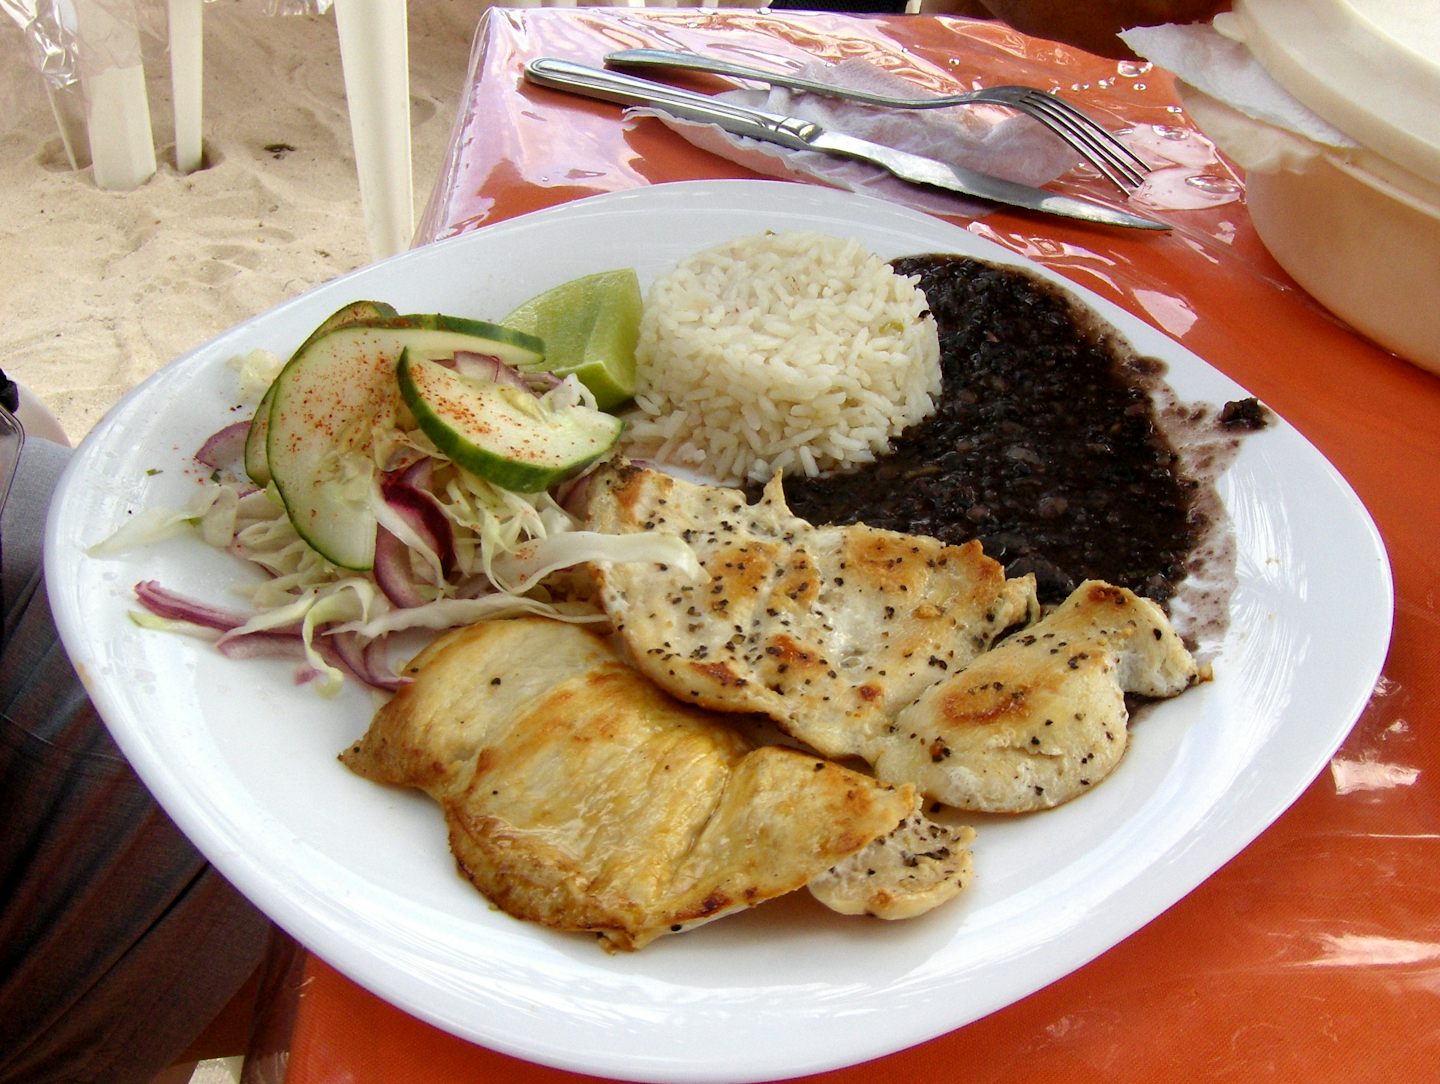 This is what my husband chicken meal looked like at Costa Mayas Caribbean Life on the beach